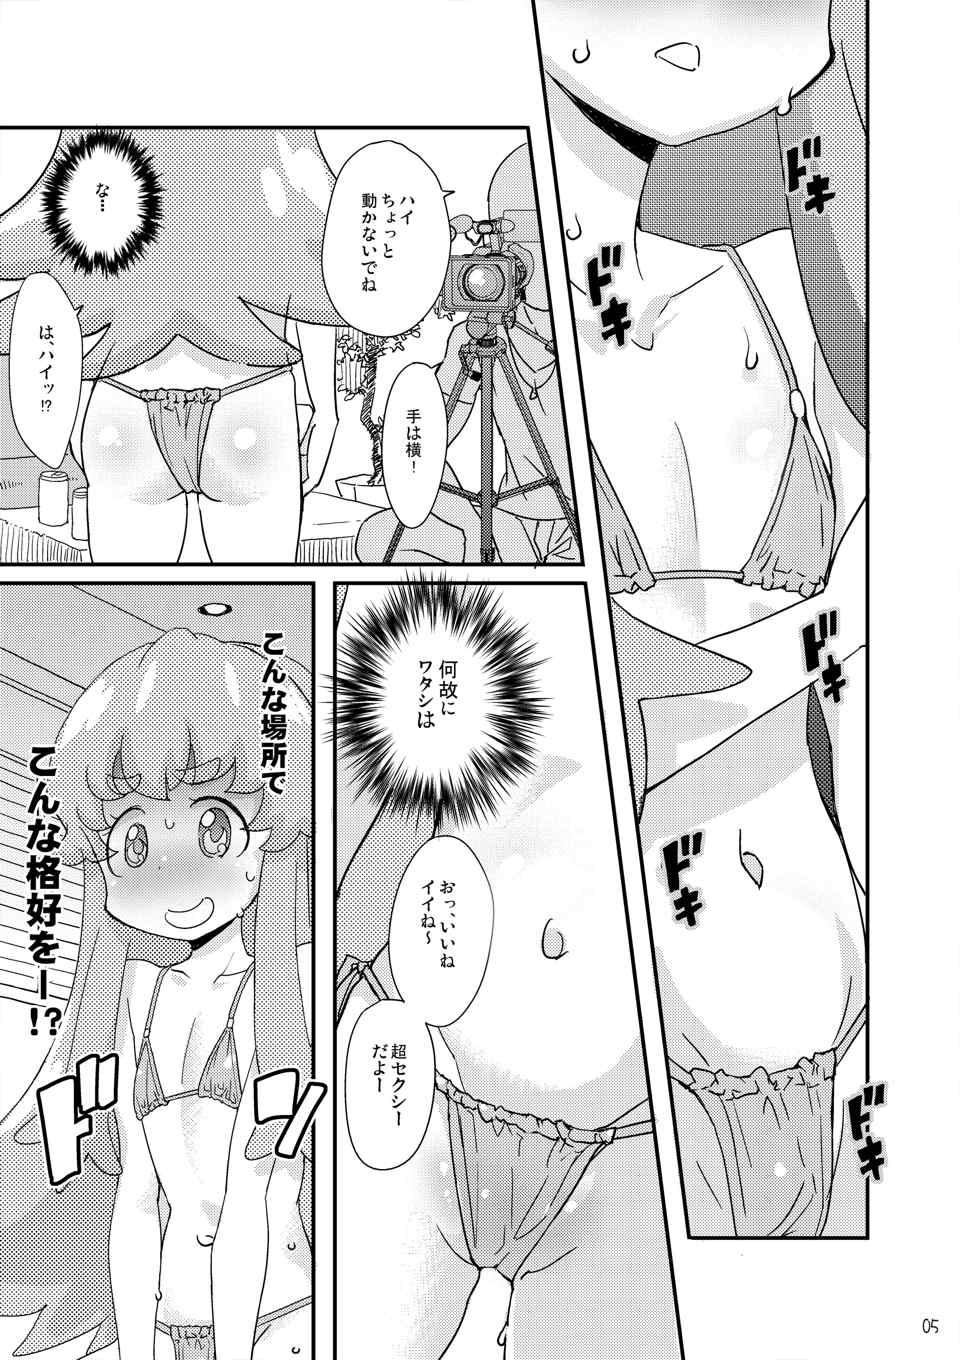 Twink HachaMecha Princess HiME-chan - Happinesscharge precure Street - Page 5